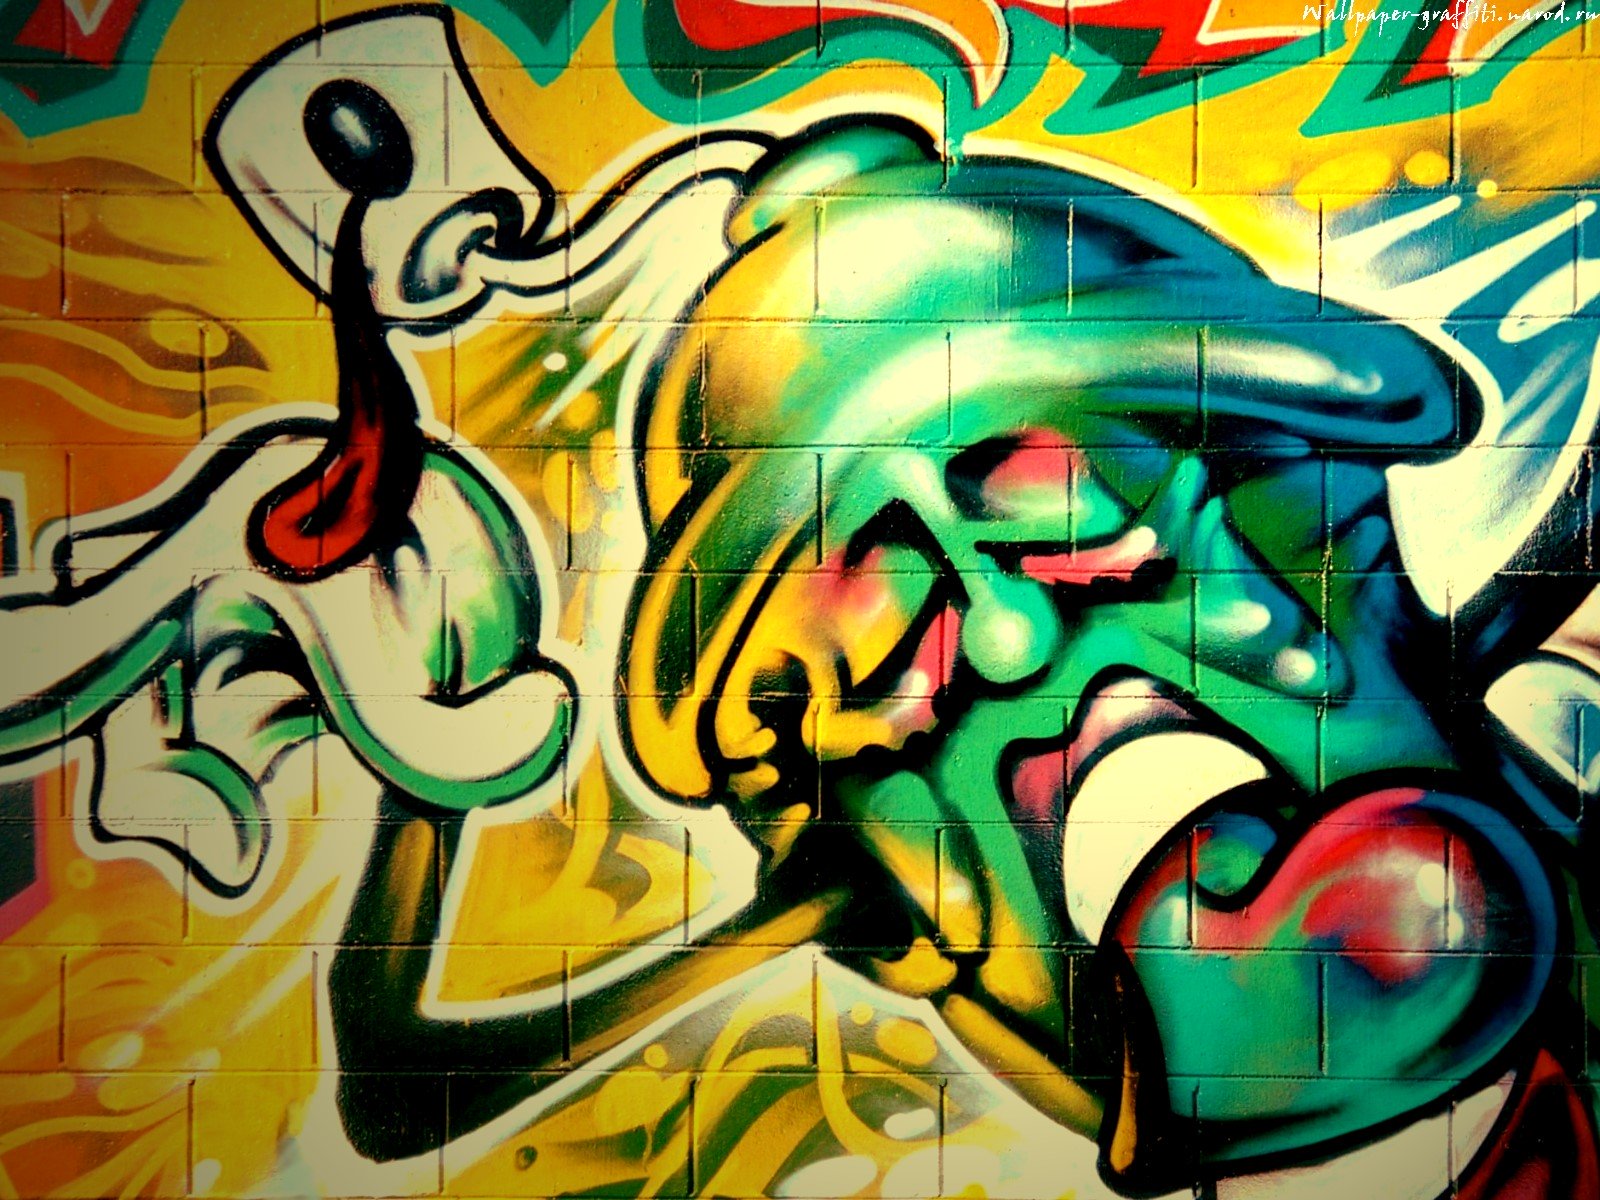 Gallery For gt Really Cool Graffiti Backgrounds